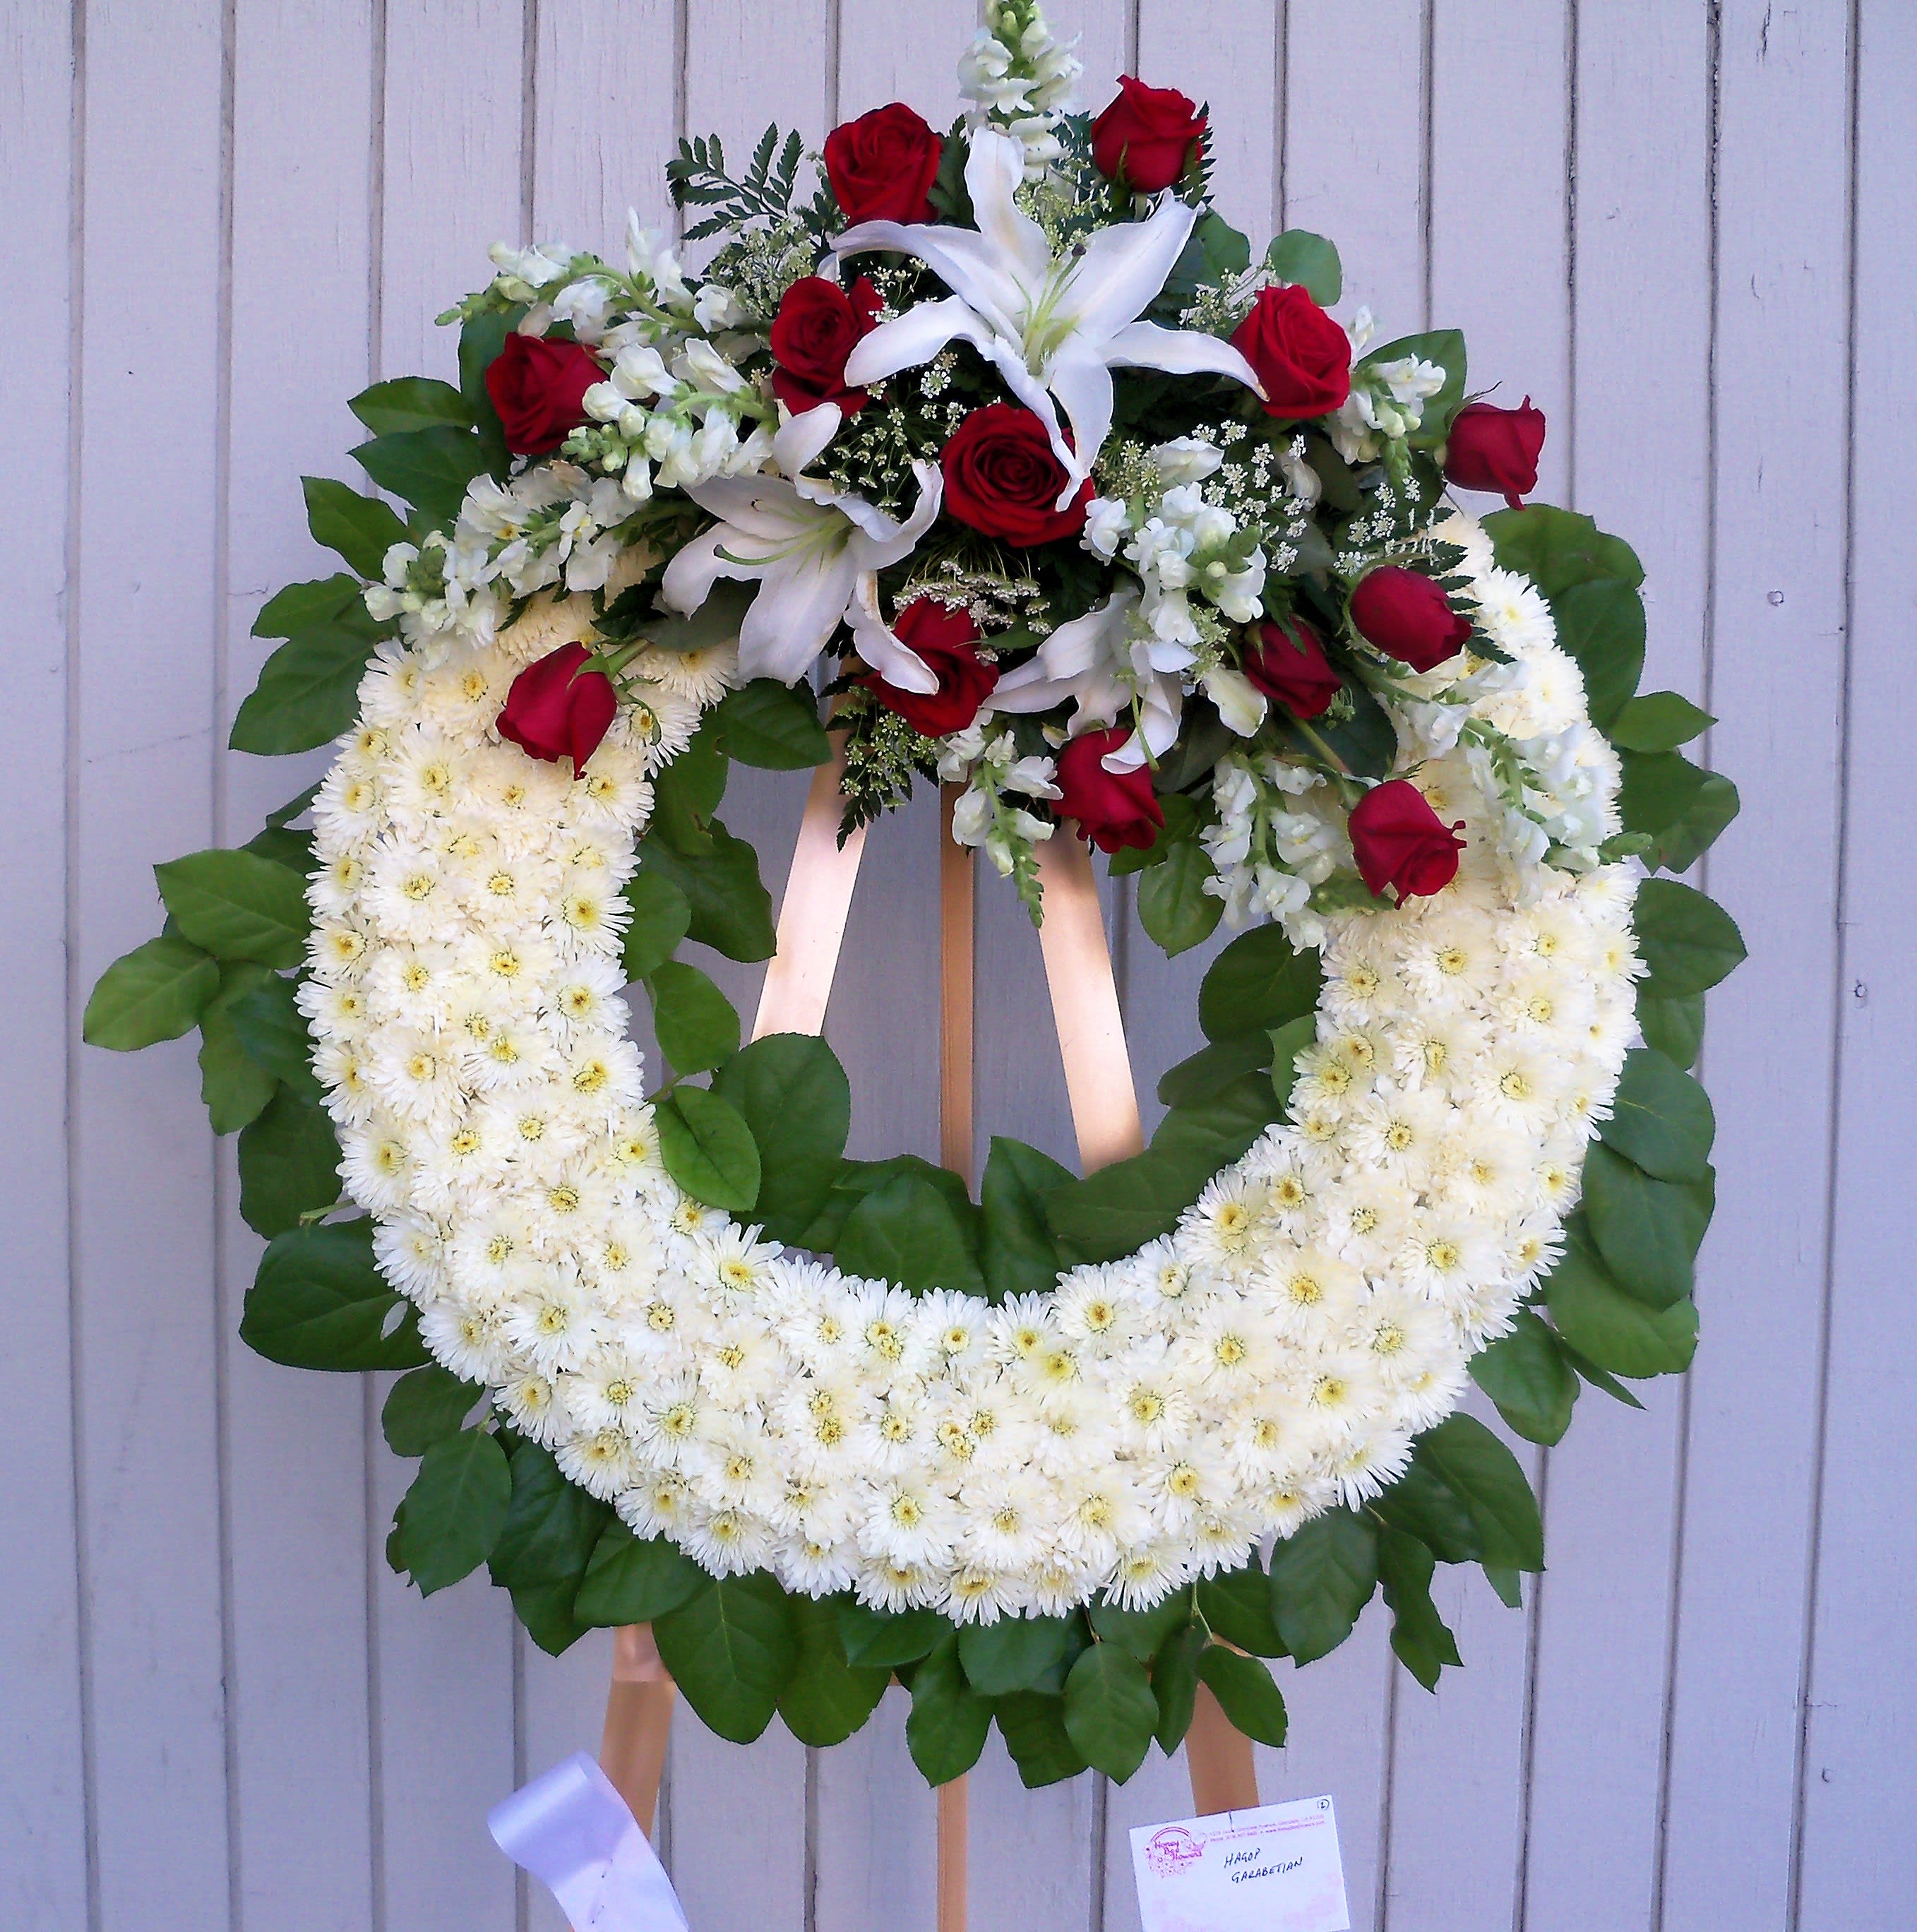 Casablanca Wreath - Designed with cushion mums and the arrangement includes roses, stock, casablanca lilies and greenery. This standing wreath comes on a 6ft easel. Colors may be customized, please leave color preference in the special instructions section. Comes in 3 different sizes: 24&quot; - Standard 27&quot; - Deluxe 30&quot; - Premium